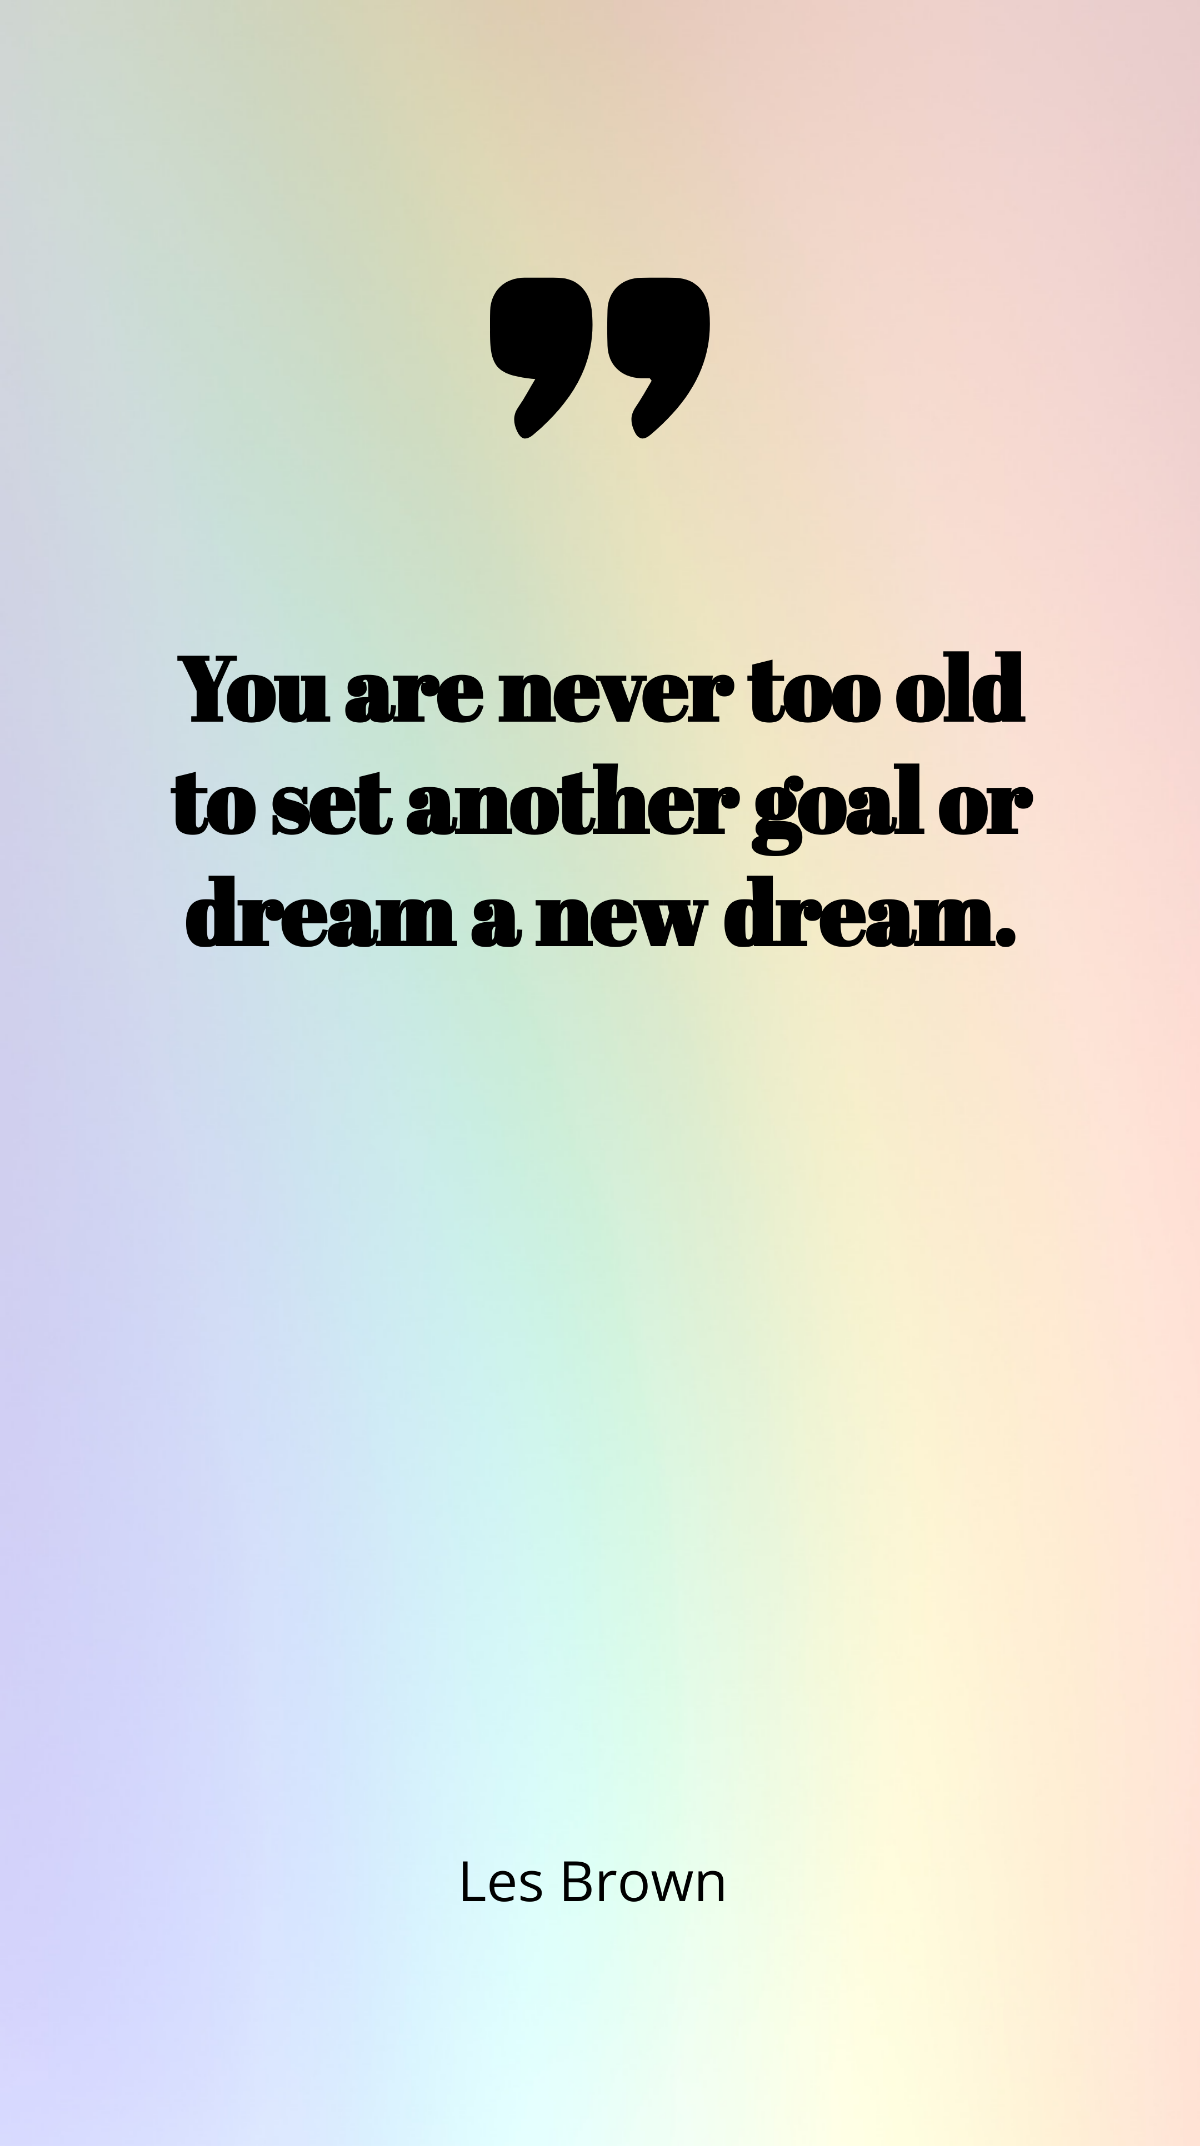 Les Brown - You are never too old to set another goal or dream a new dream. Template